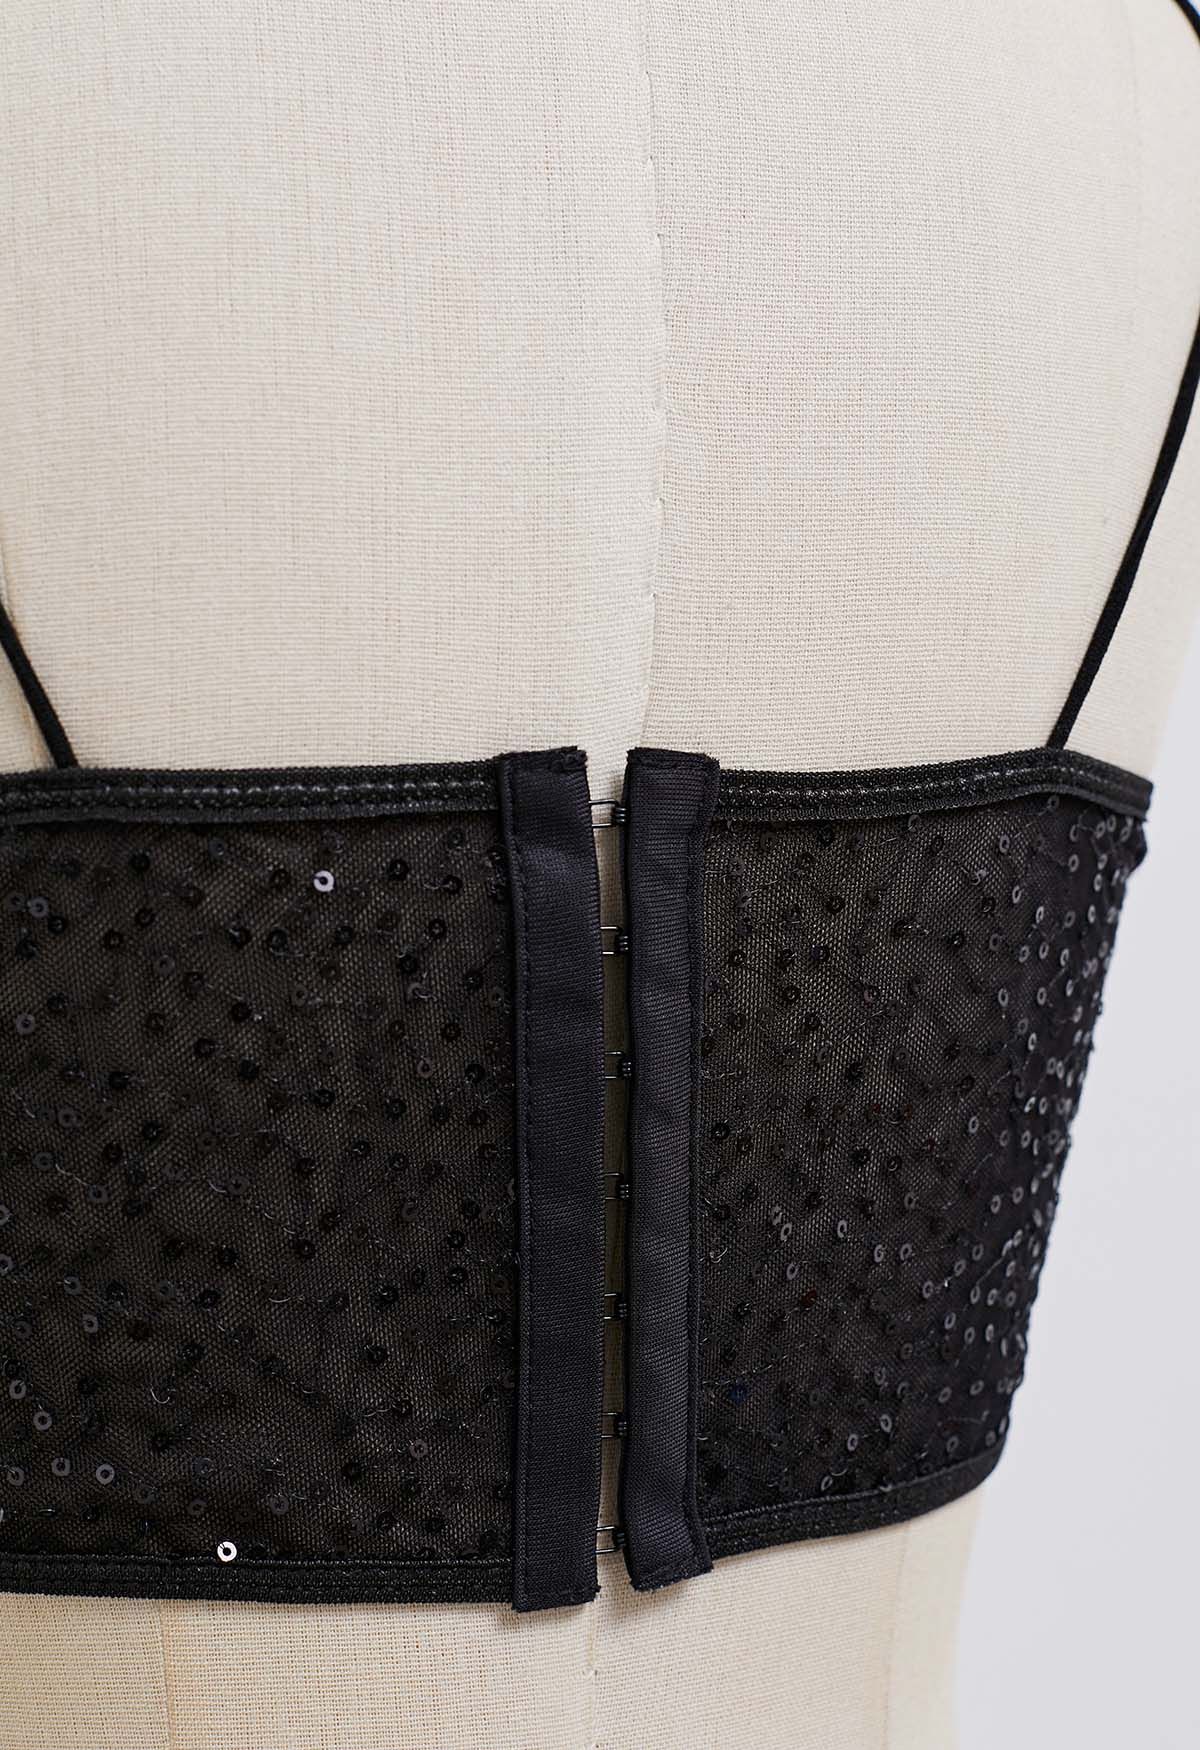 Sequin Embroidered Corset Bustier Top in Black